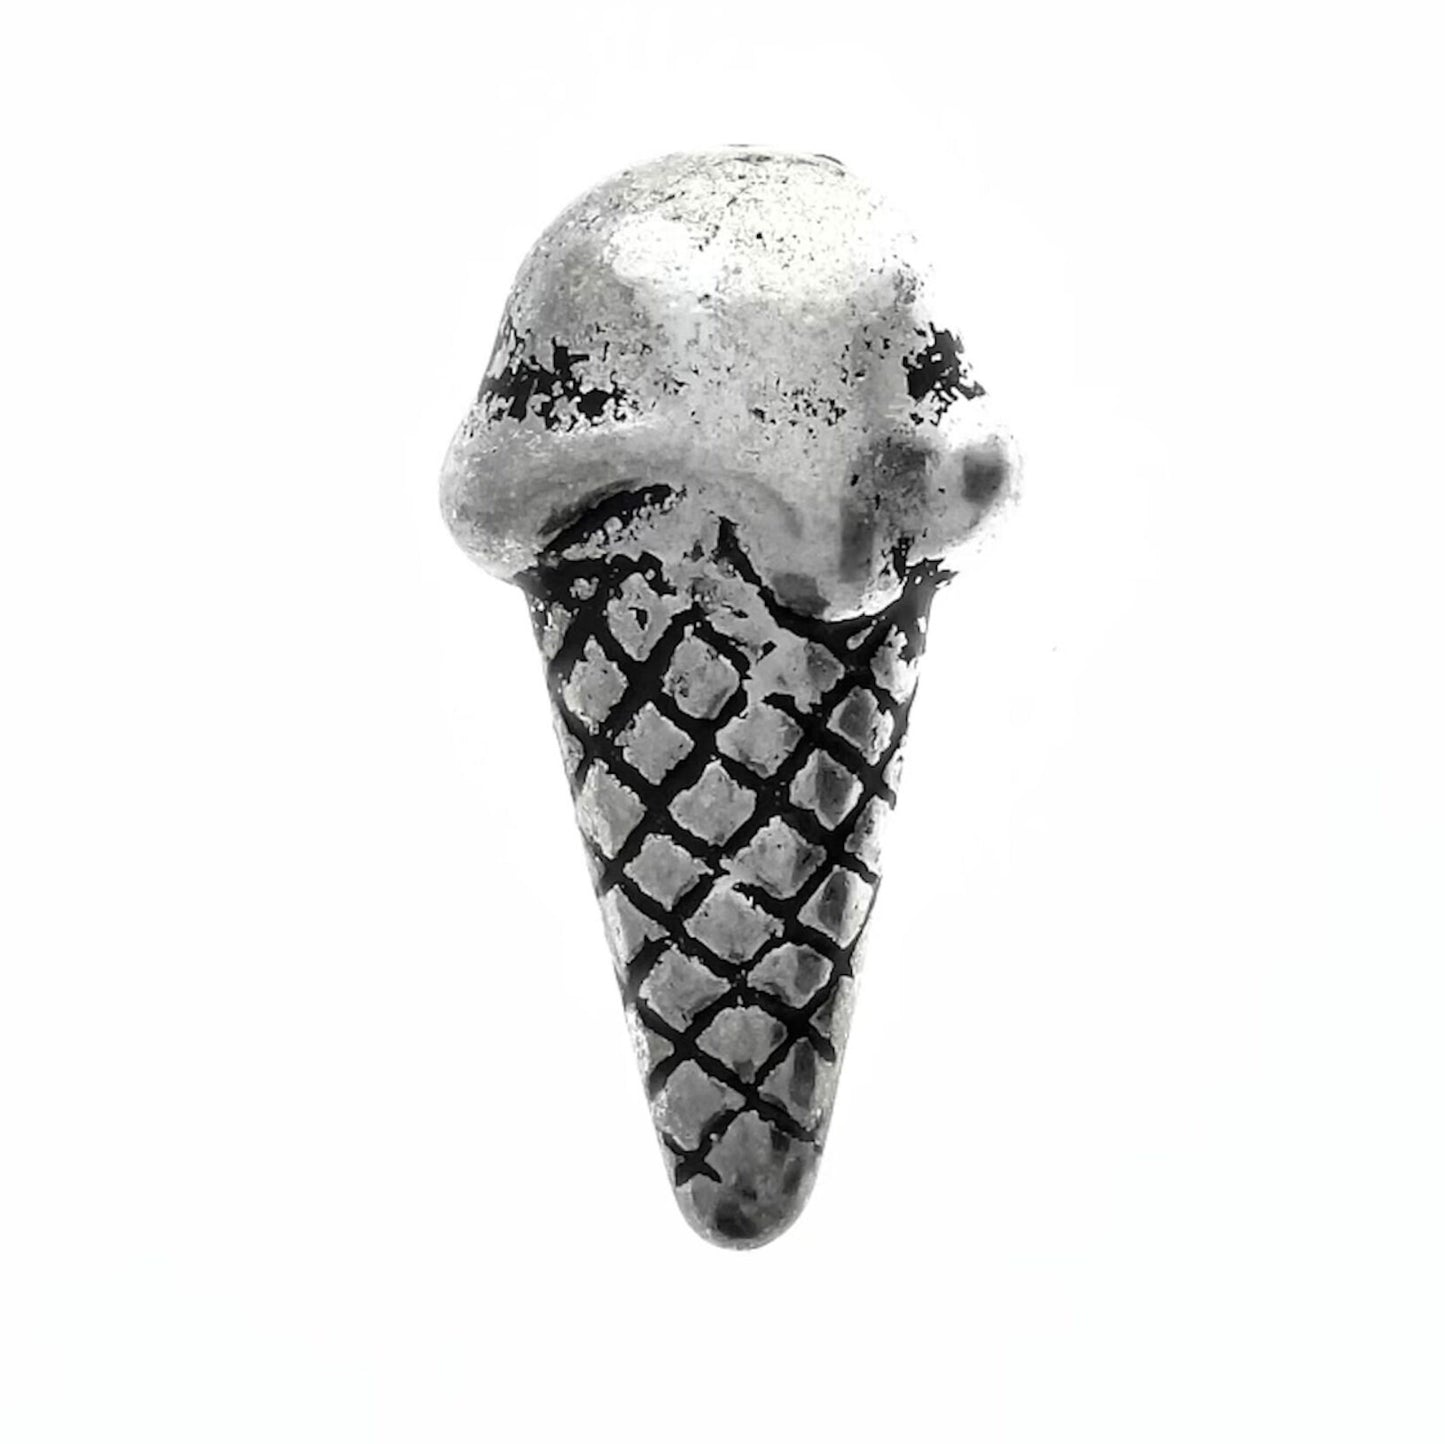 Vintage Ice CREAM CONE Cabochon Jewelry Finding, for earrings, pins, or buttons, antique silver or antique gold, pack of 3